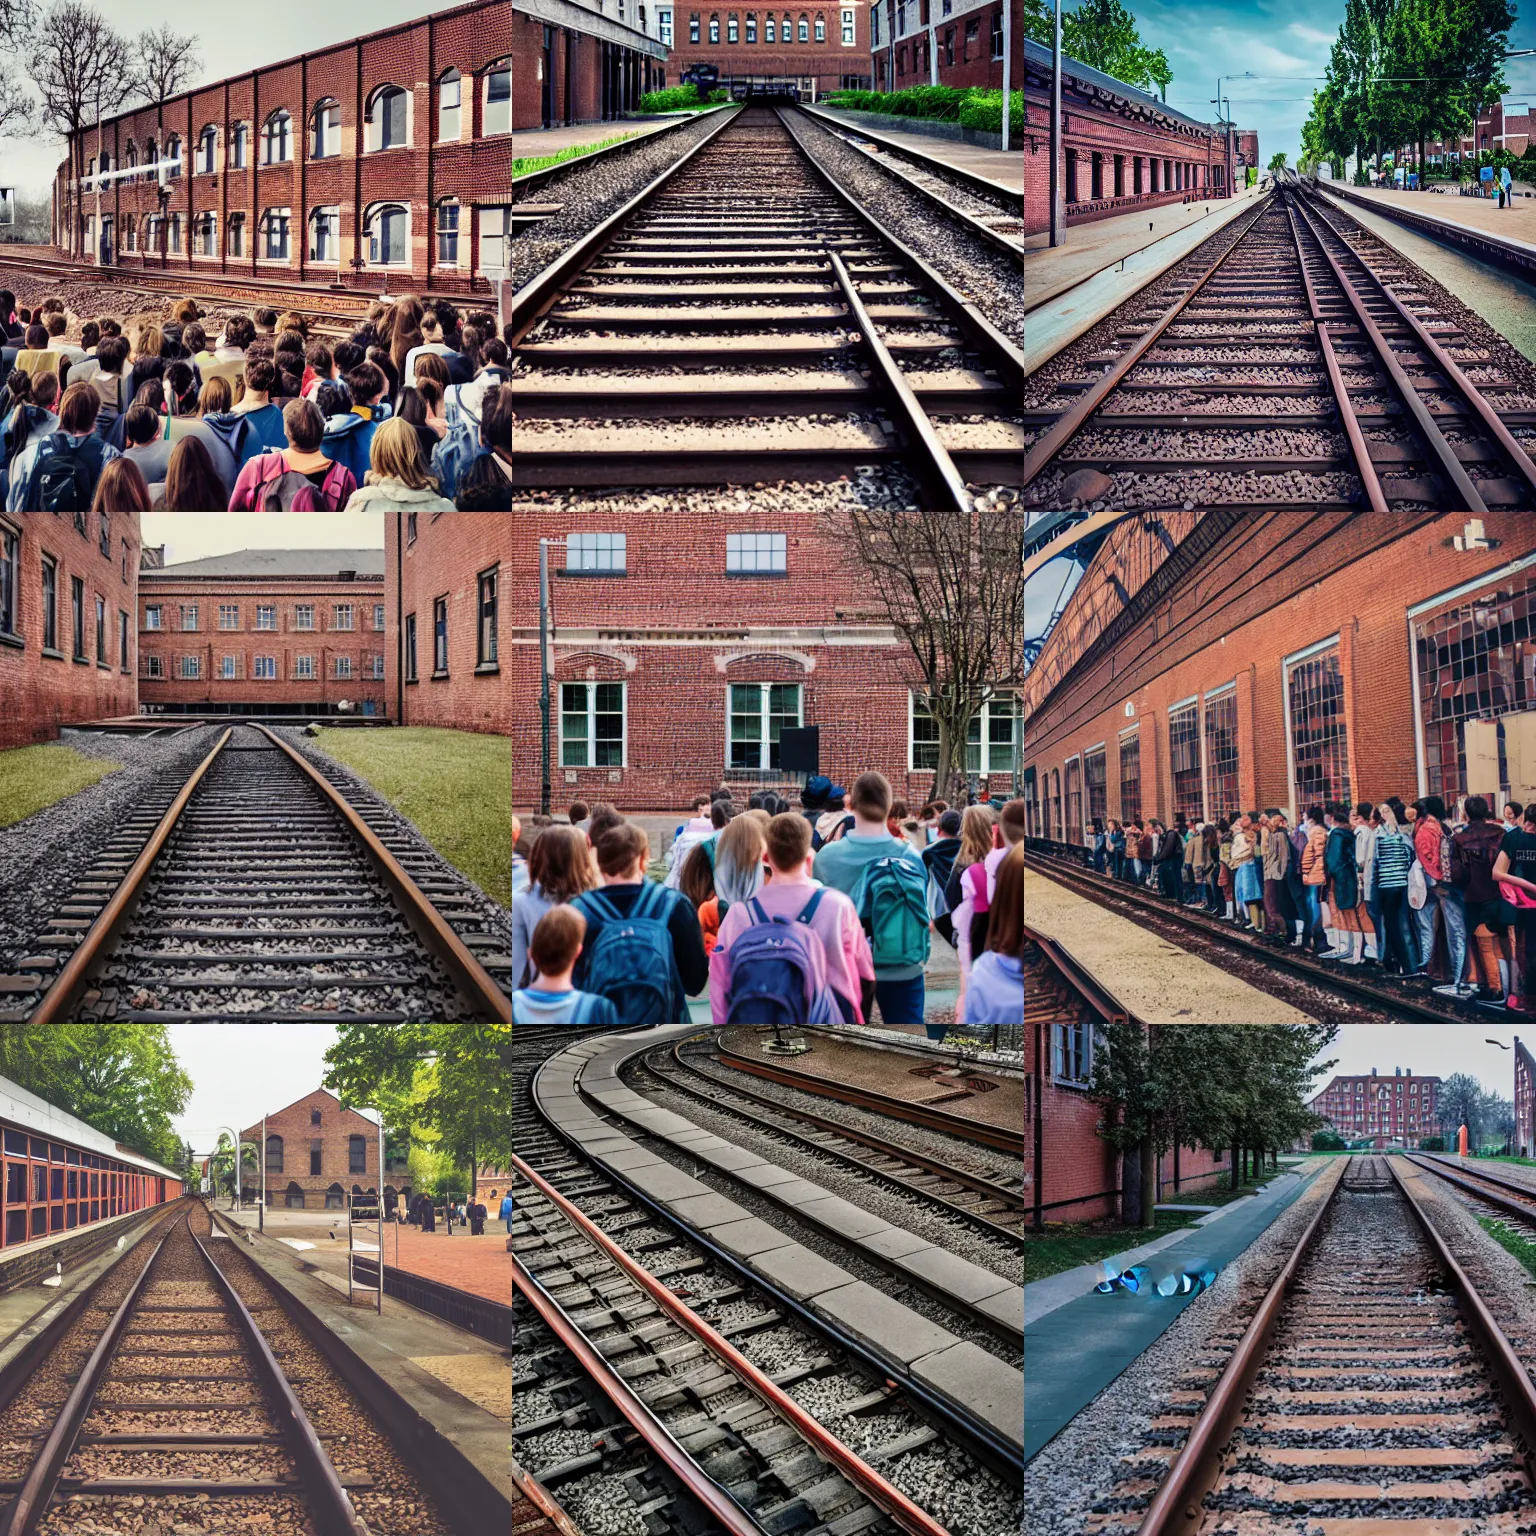 Prompt: an old brick high school with a train track going through it, crowds of students watching - stock image, a stock photo by schelte a bolswert, shutterstock, symbolism, stockphoto, colorized, stock photo